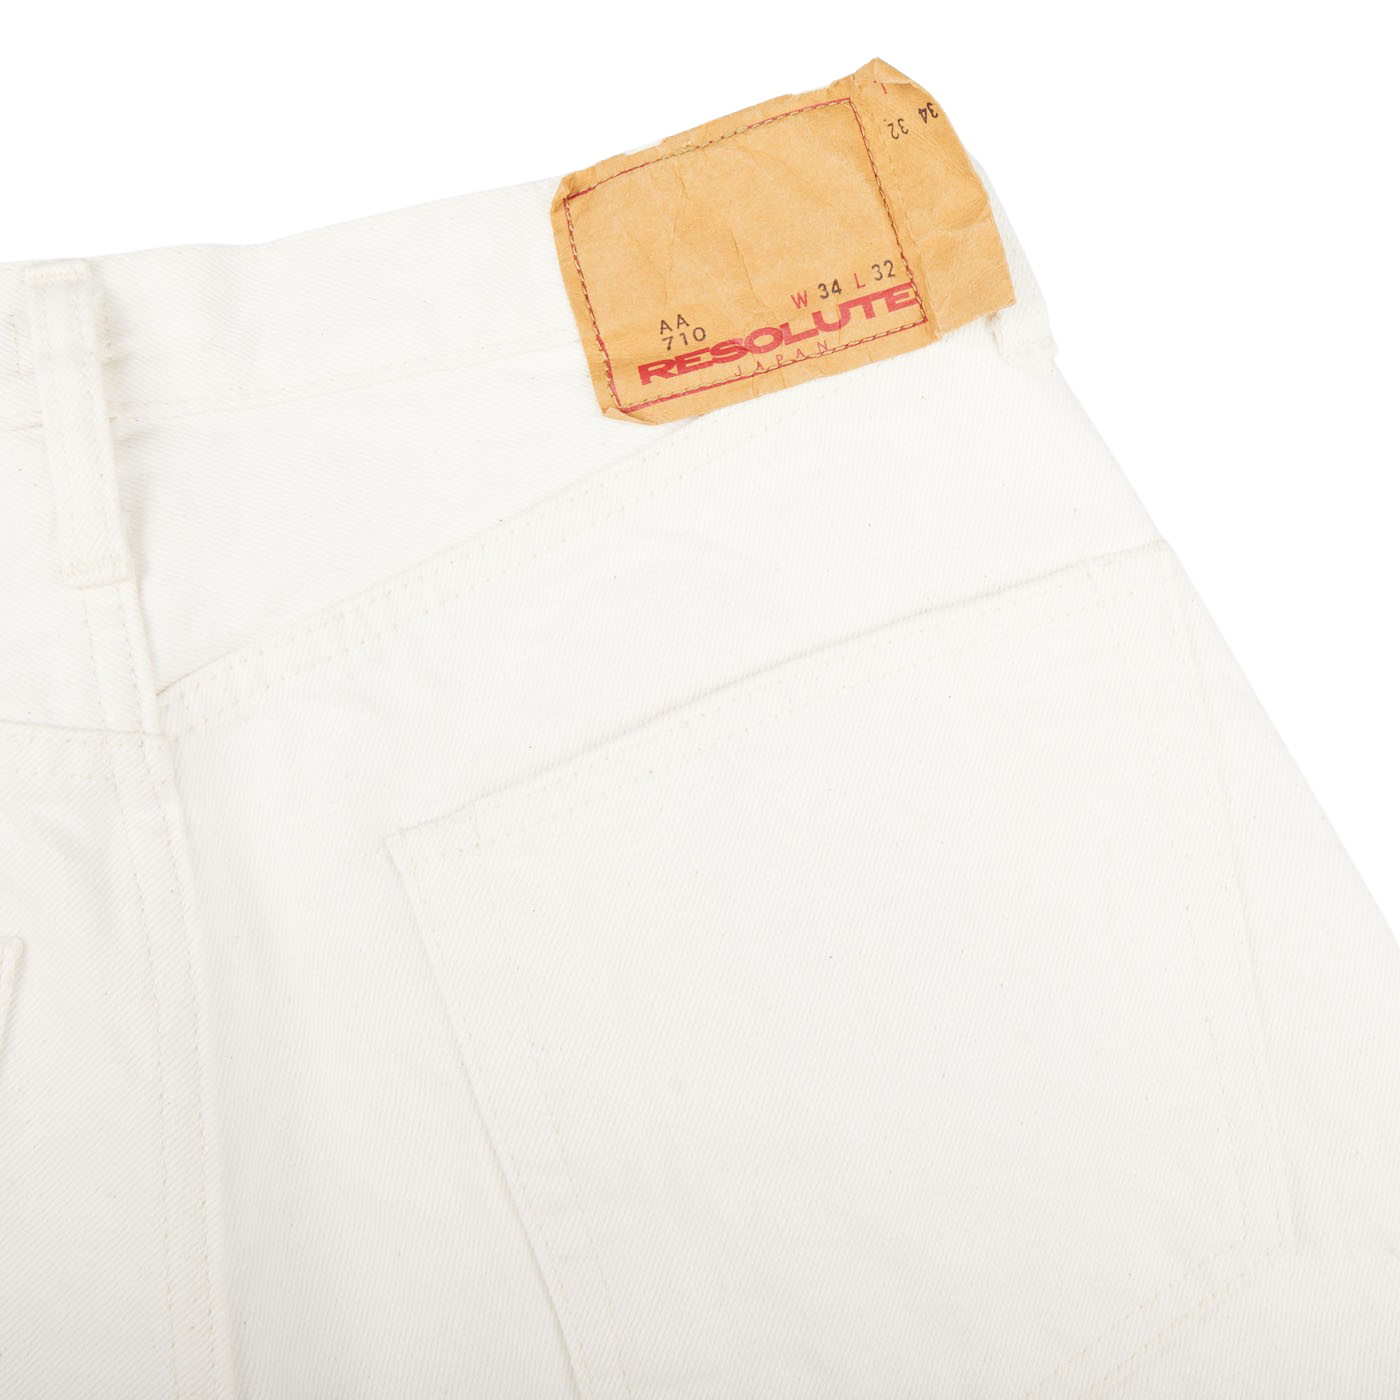 Resolute Cream Cotton Selvedge 710 One Wash Jeans Pocket